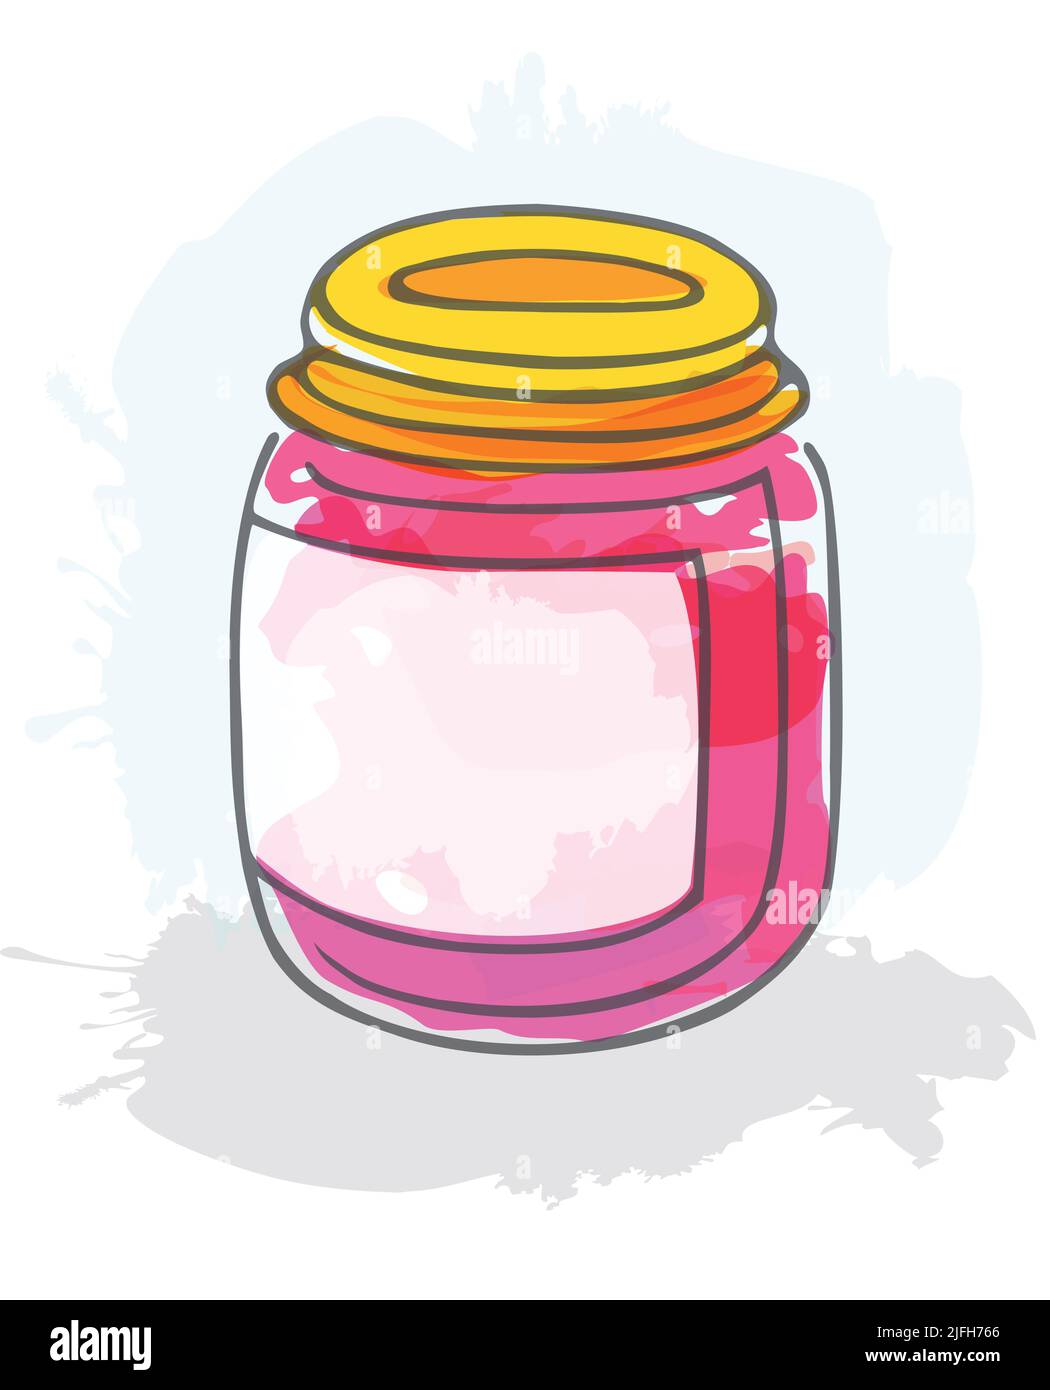 Jar of jam, creative illustration with watercolor style. Food logo element. Isolated abstract graphic design template. Drawing style concept. Bottle o Stock Vector